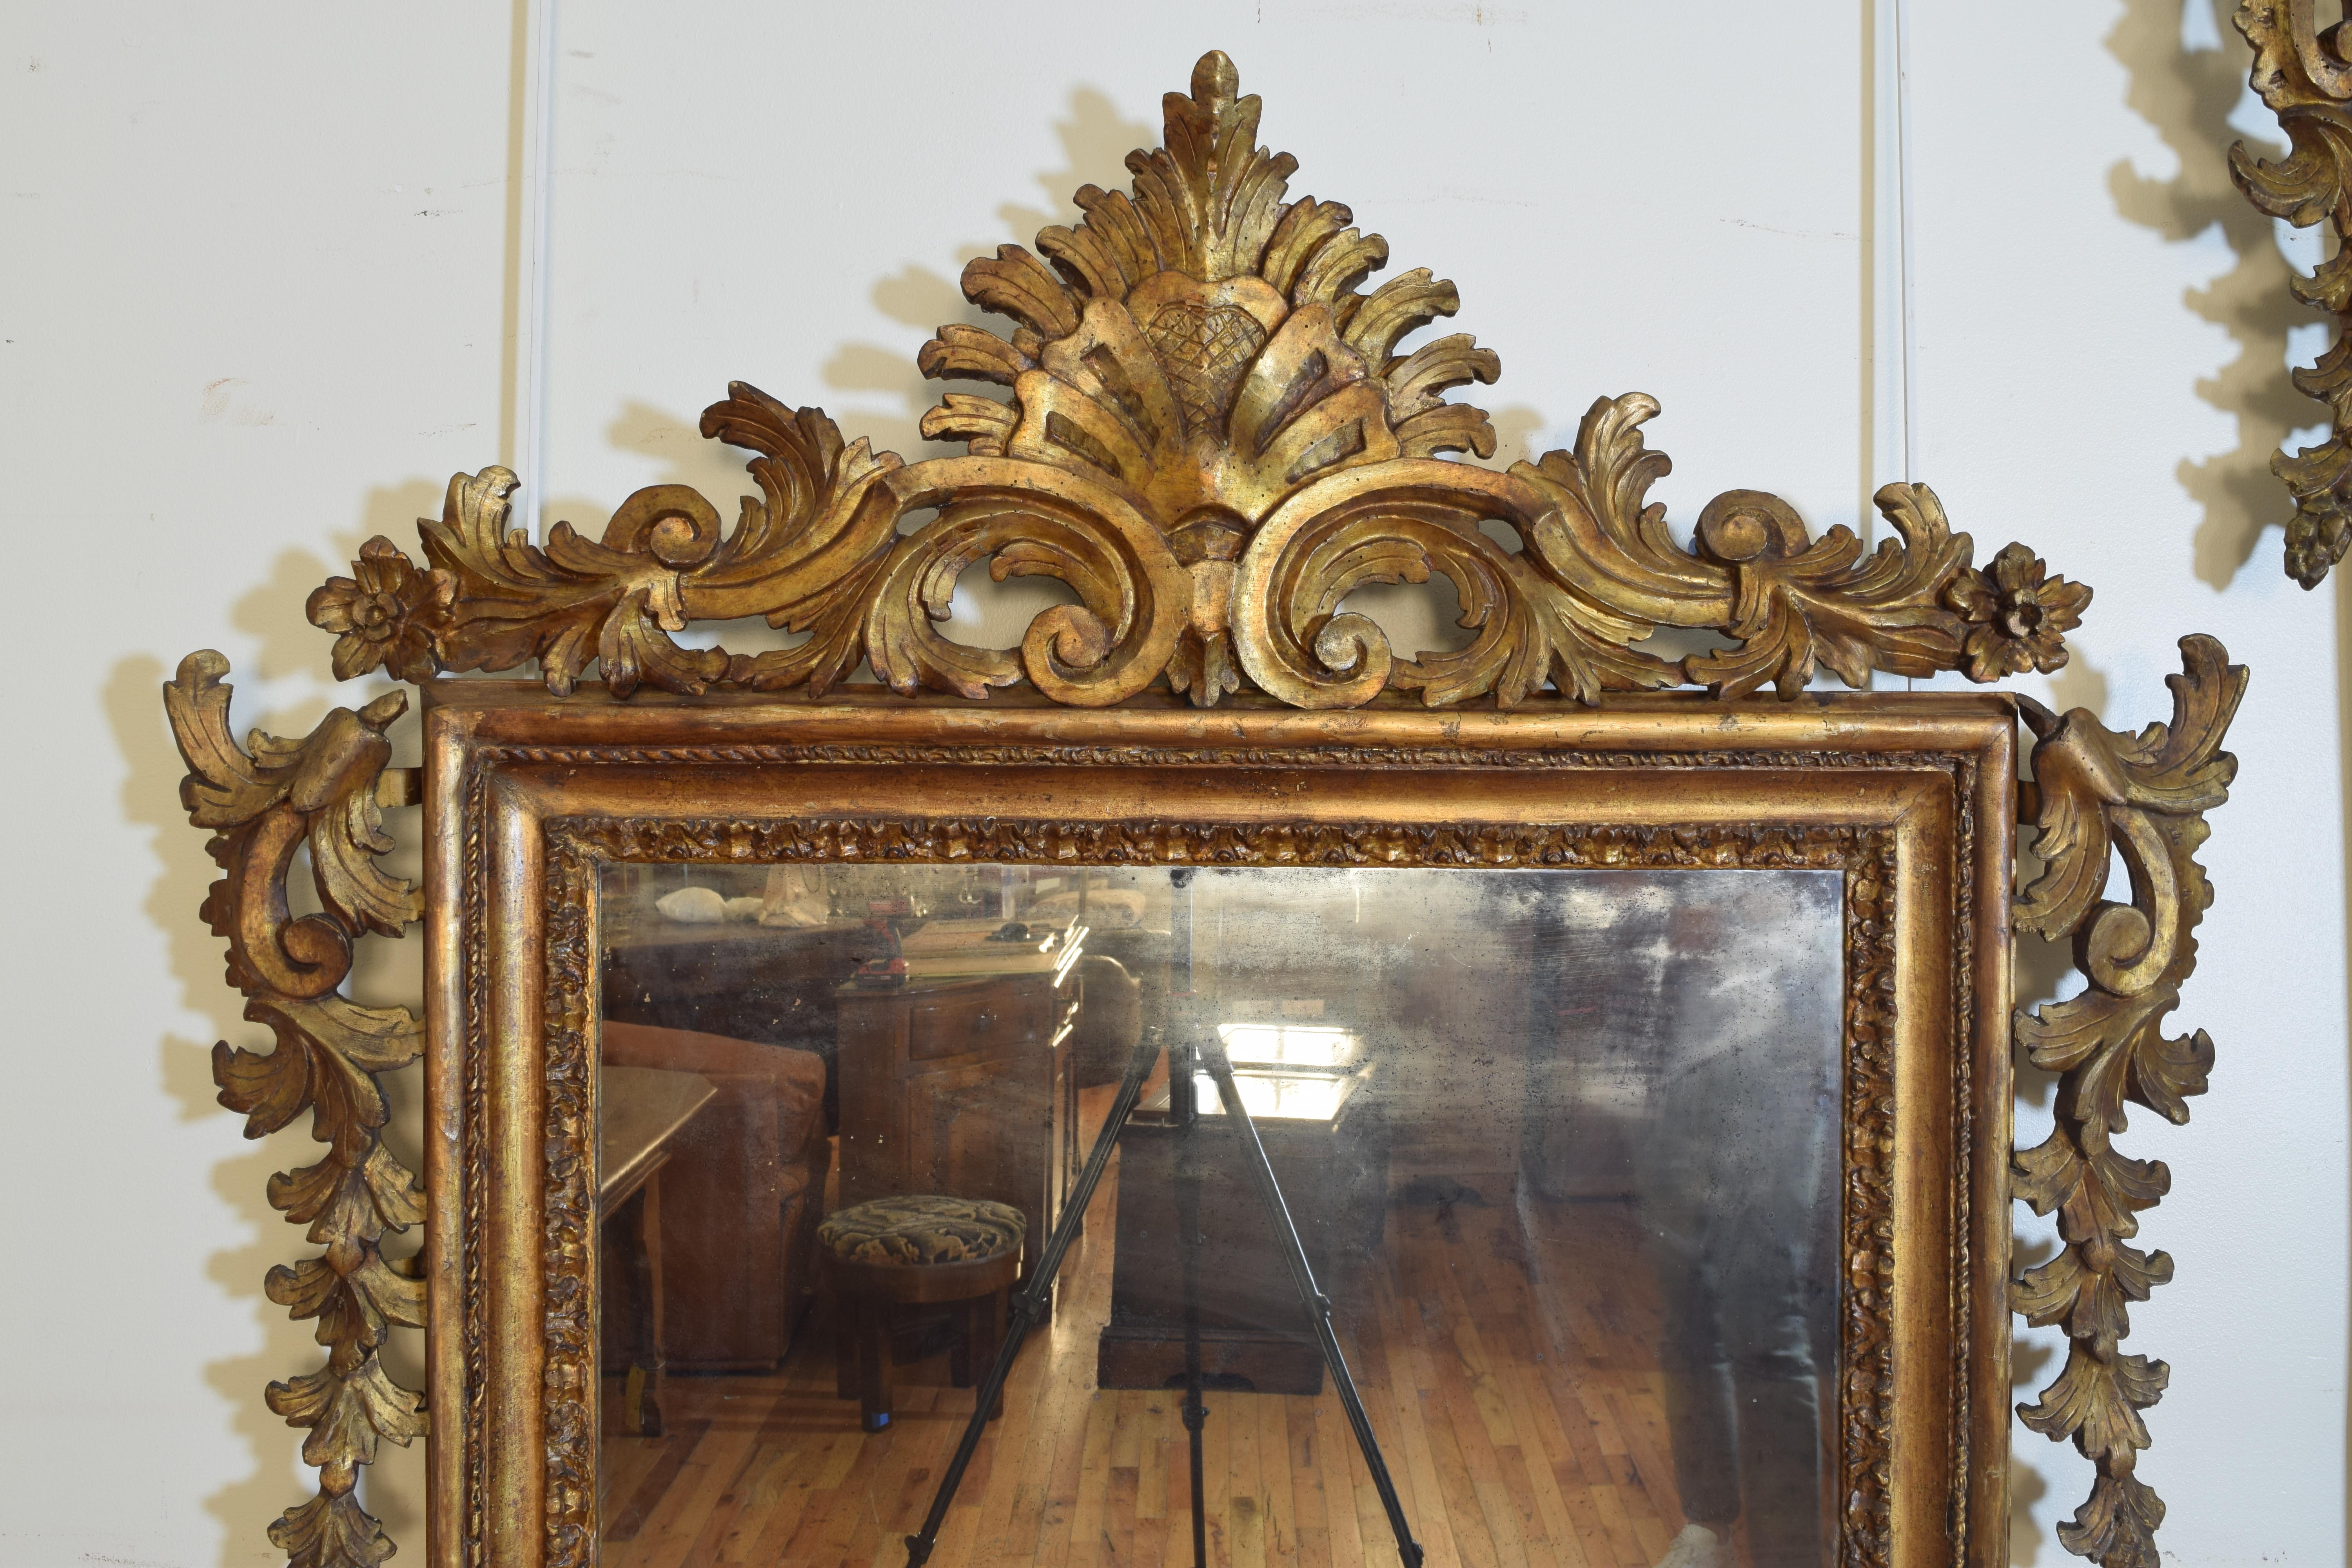 Giltwood Pair of Carved Mecca Mirrors, Louis XIV Period Naples, Italy, Early 18th Century